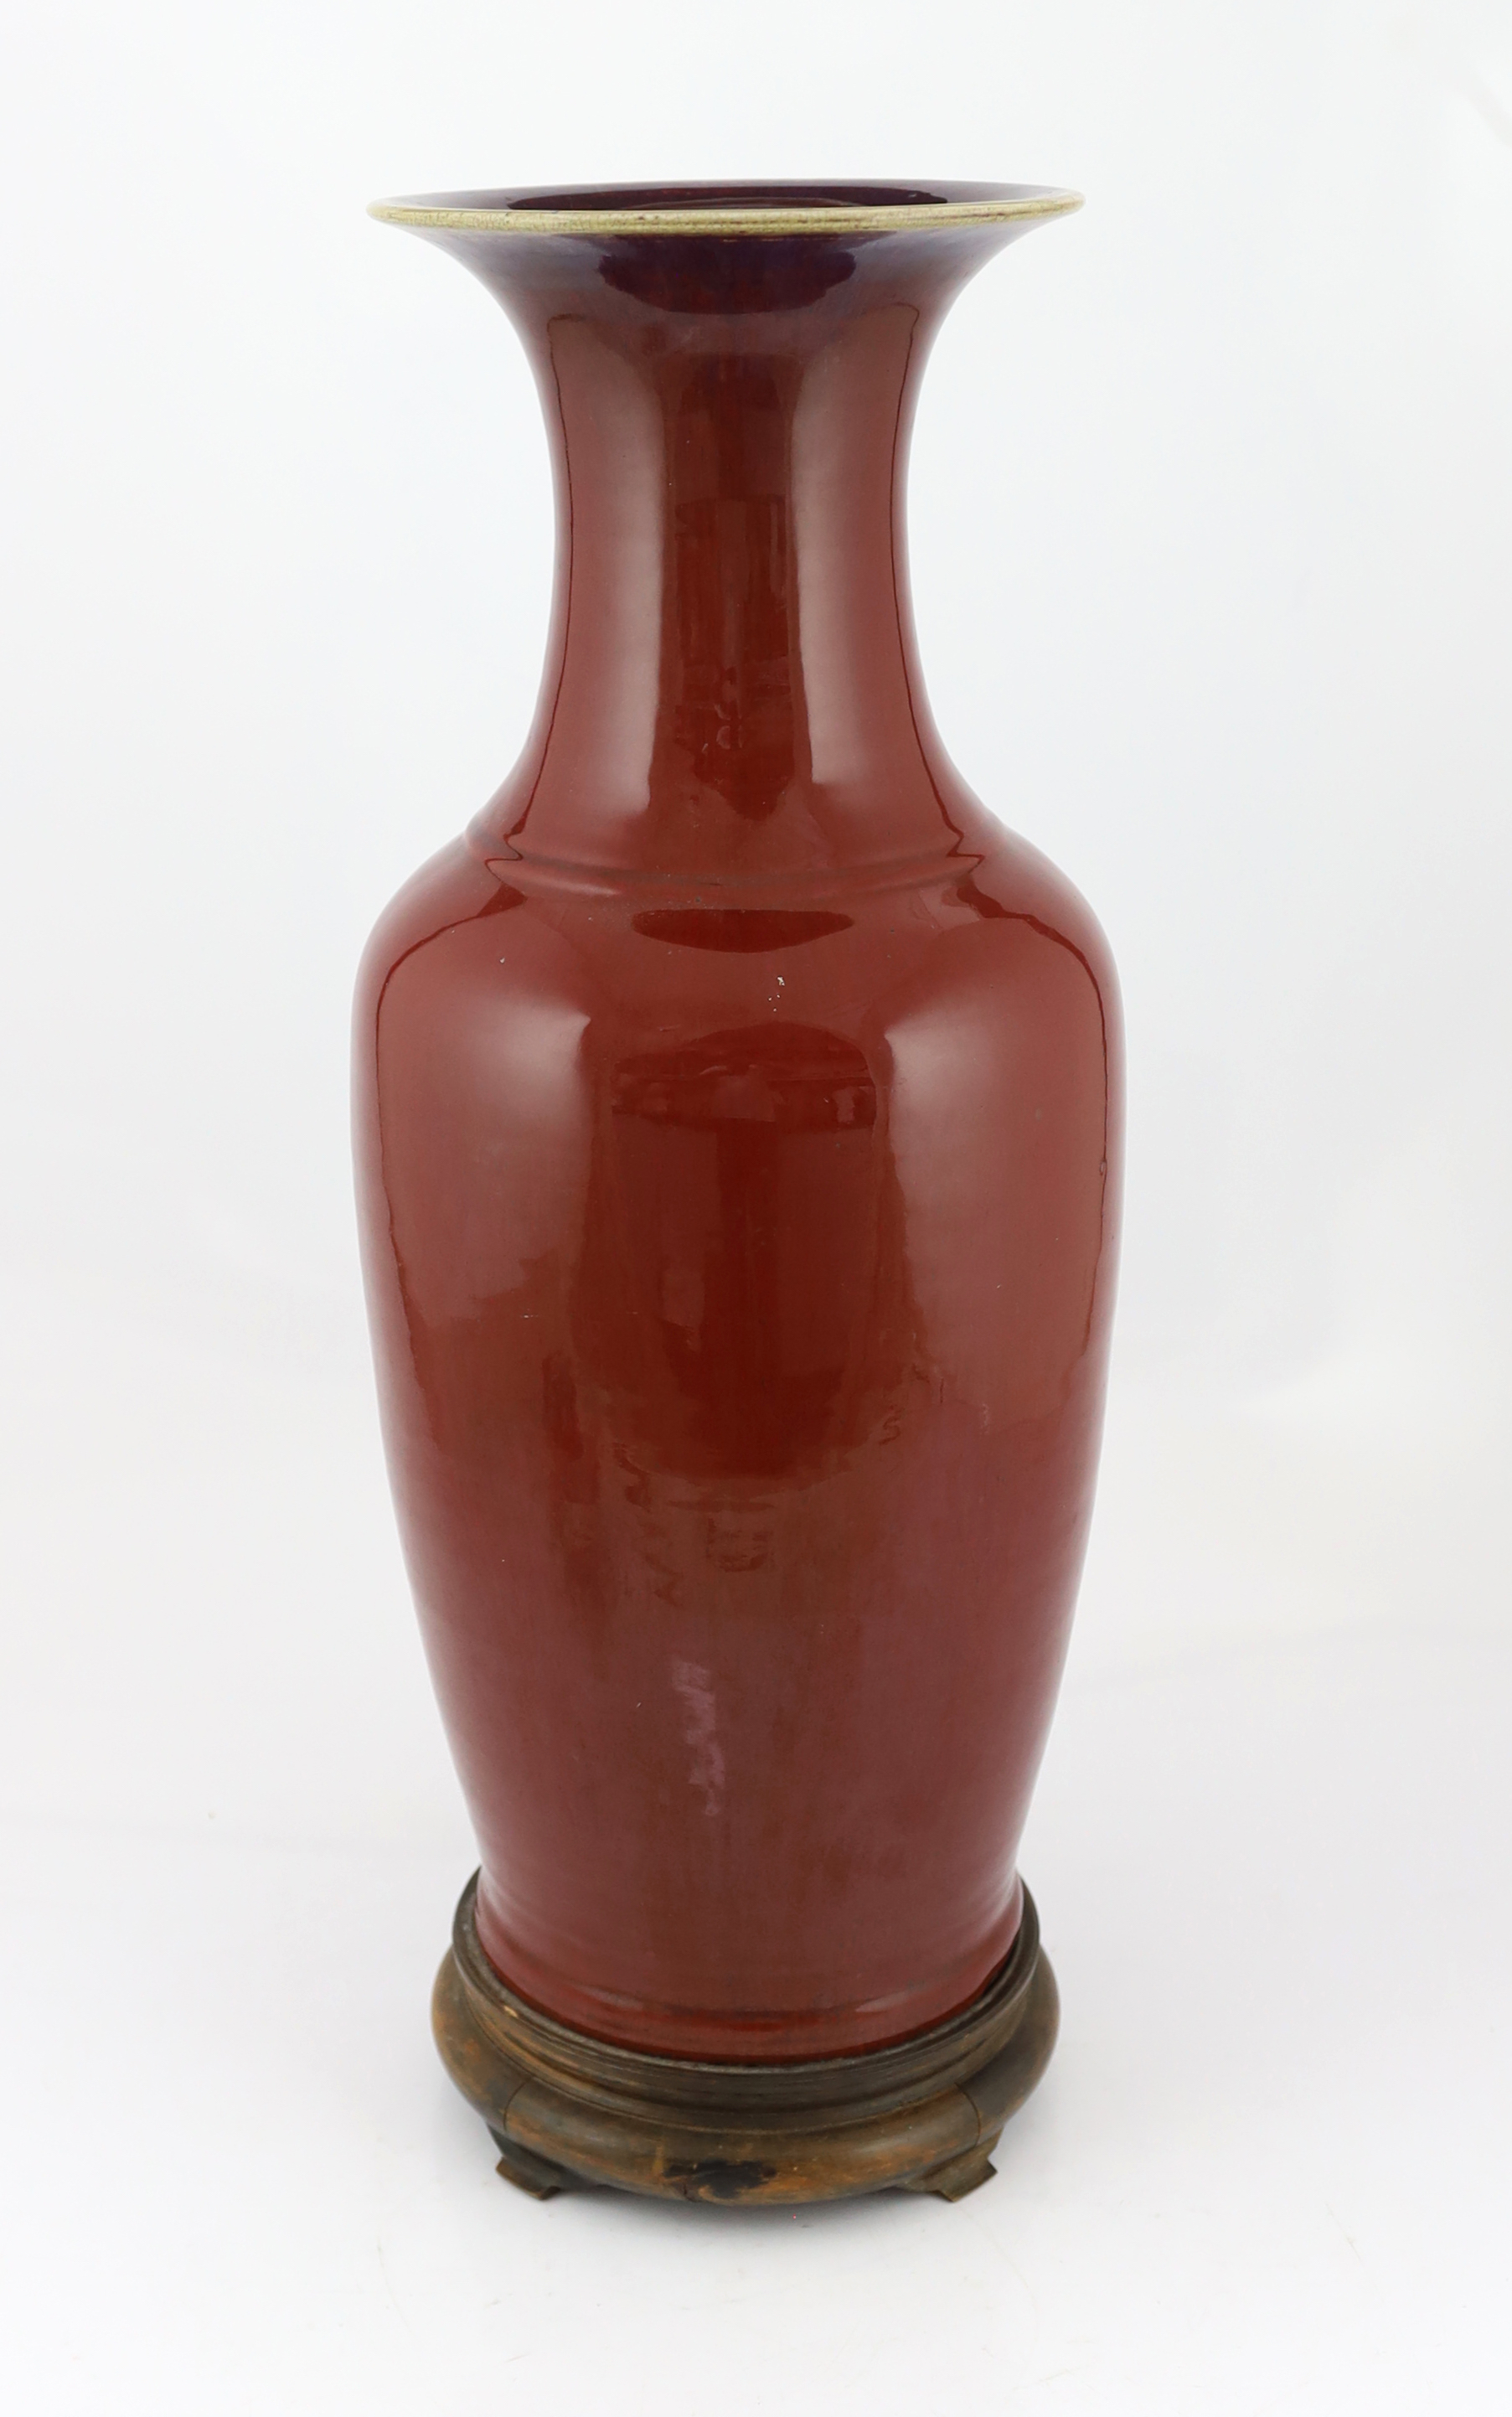 A large Chinese sang de boeuf glazed vase, early 20th century, small chip losses around the edge of the foot